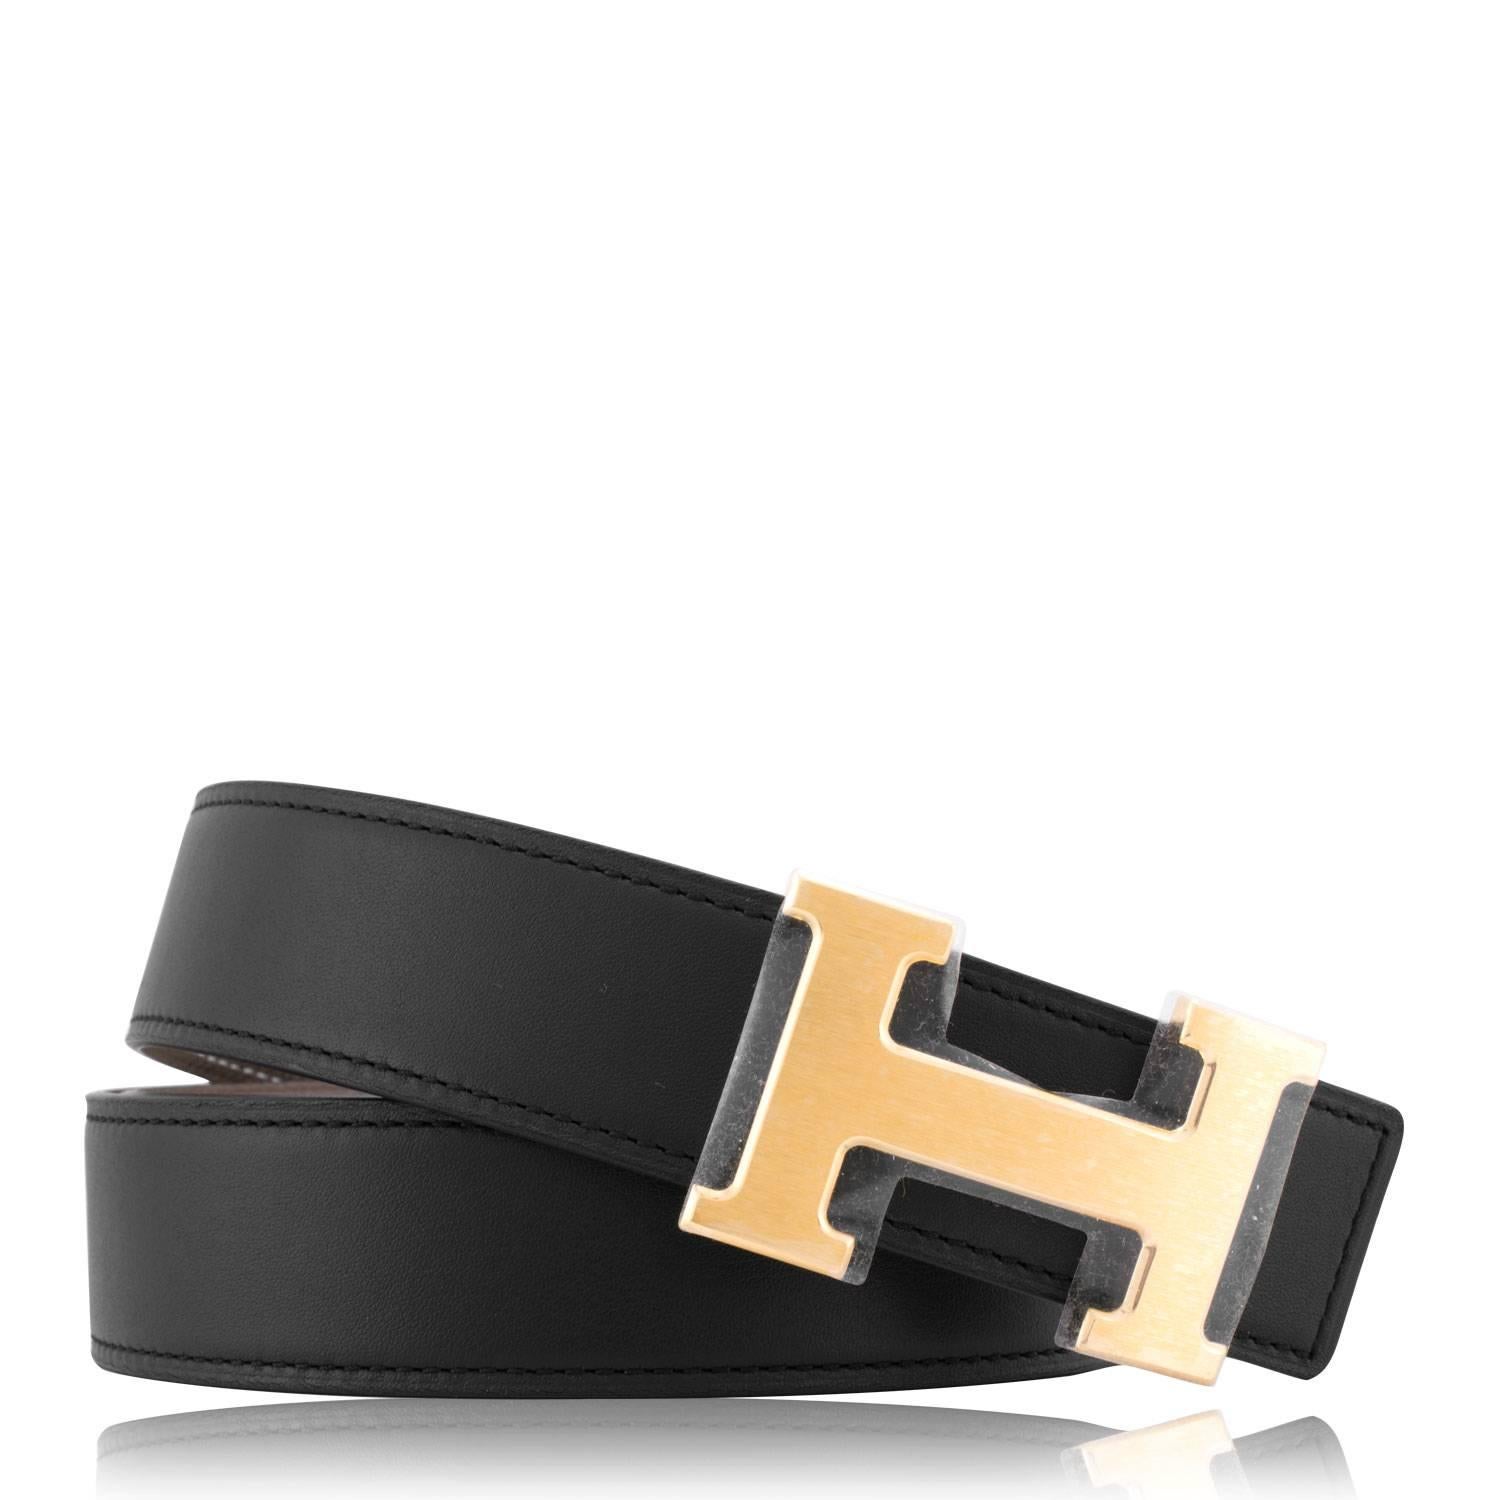 Hermes Belt 32MM Box/Togo Leather Noir/Etoupe 95CM Gold Hardware

Pre-owned and never used

Bought it in Hermes store

Color:  Black and Etoupe.

Composition: Leather Box/Togo 

Model: H.

Size: 95cm

Details:

 *Protective felt